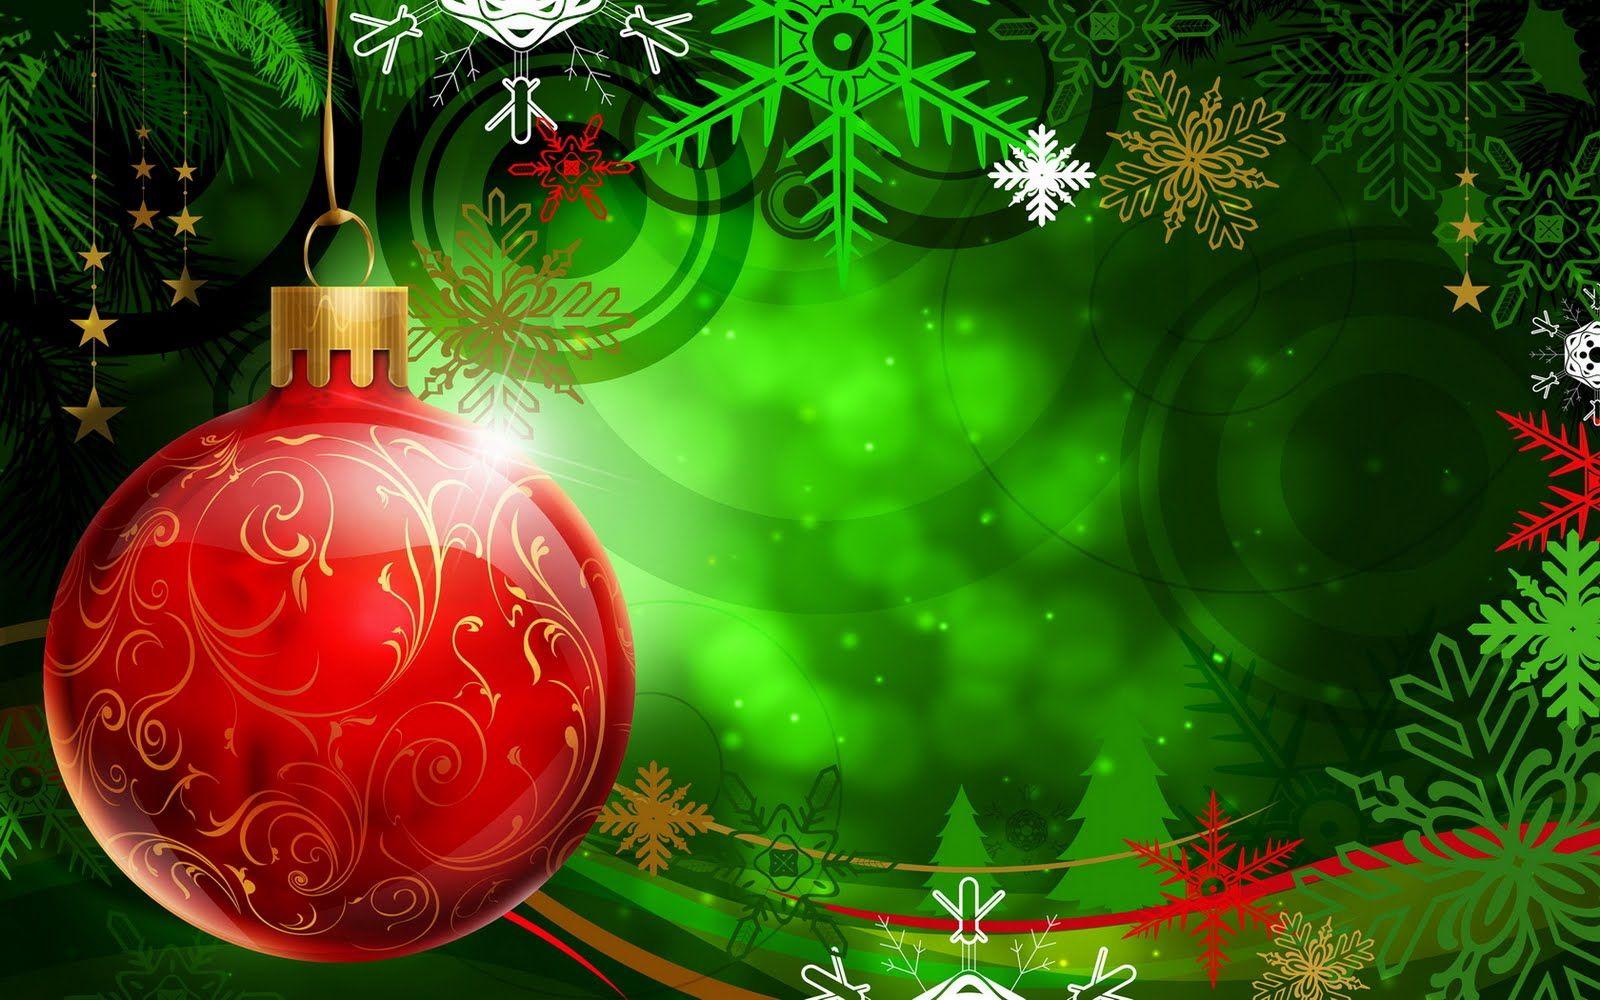 holiday green screen background images